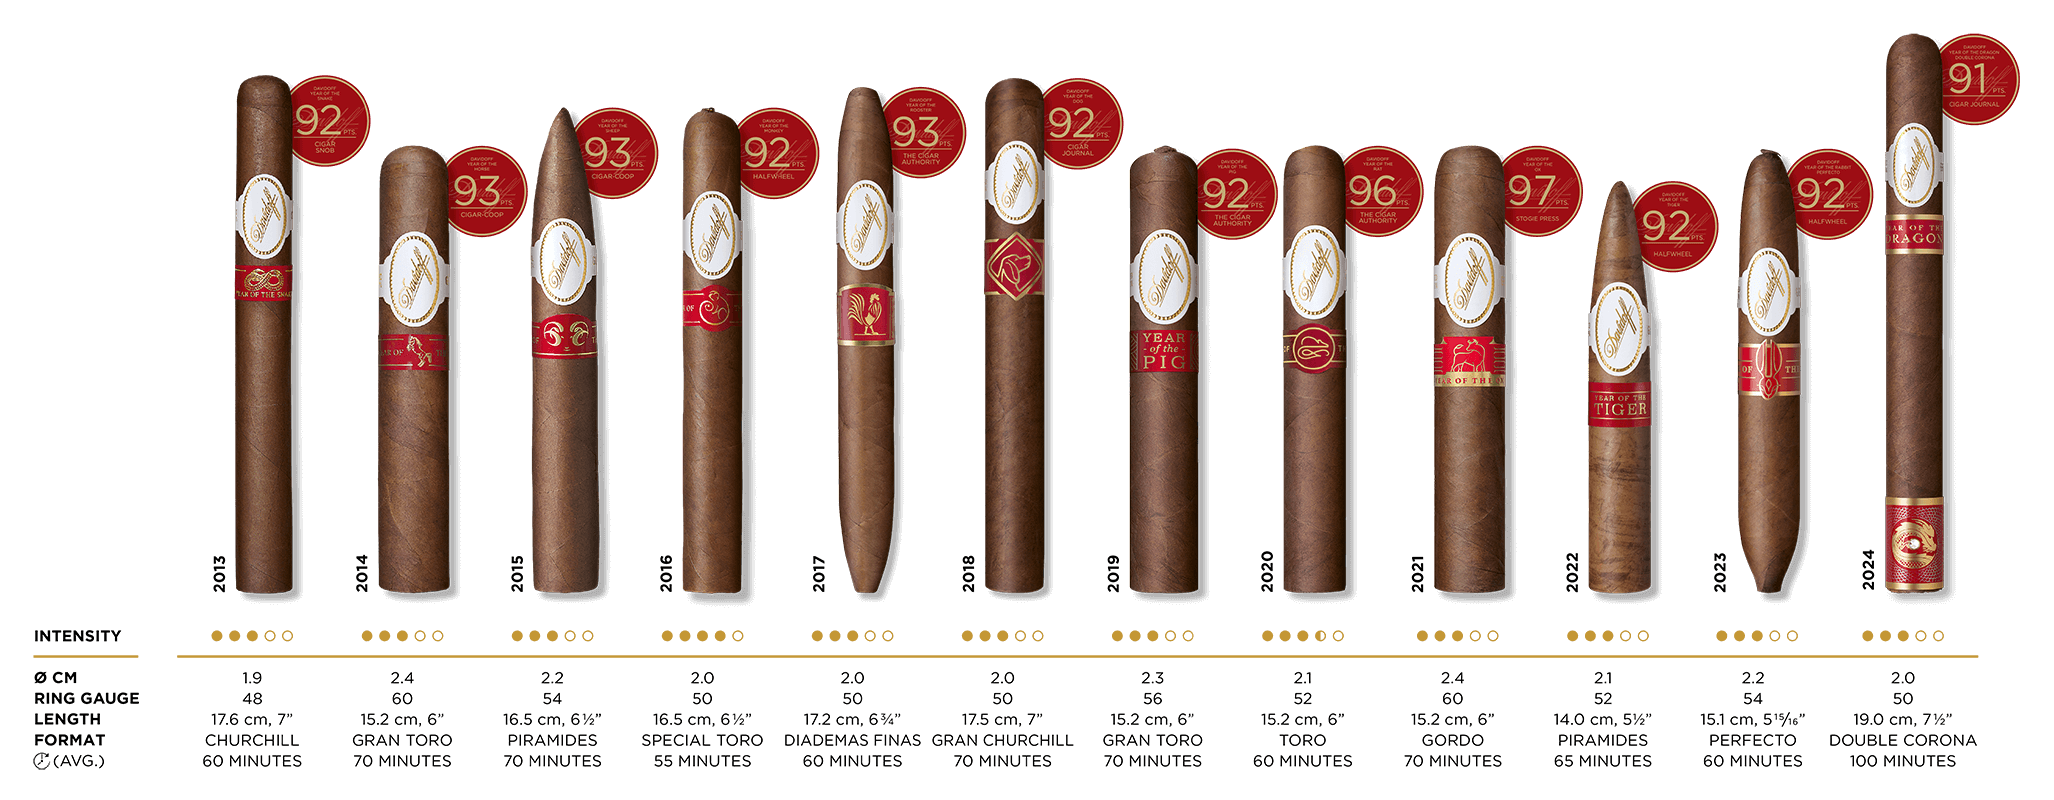 Line up of all Davidoff cigars dedicated to the Chinese zodiac from 2013 to 2024.